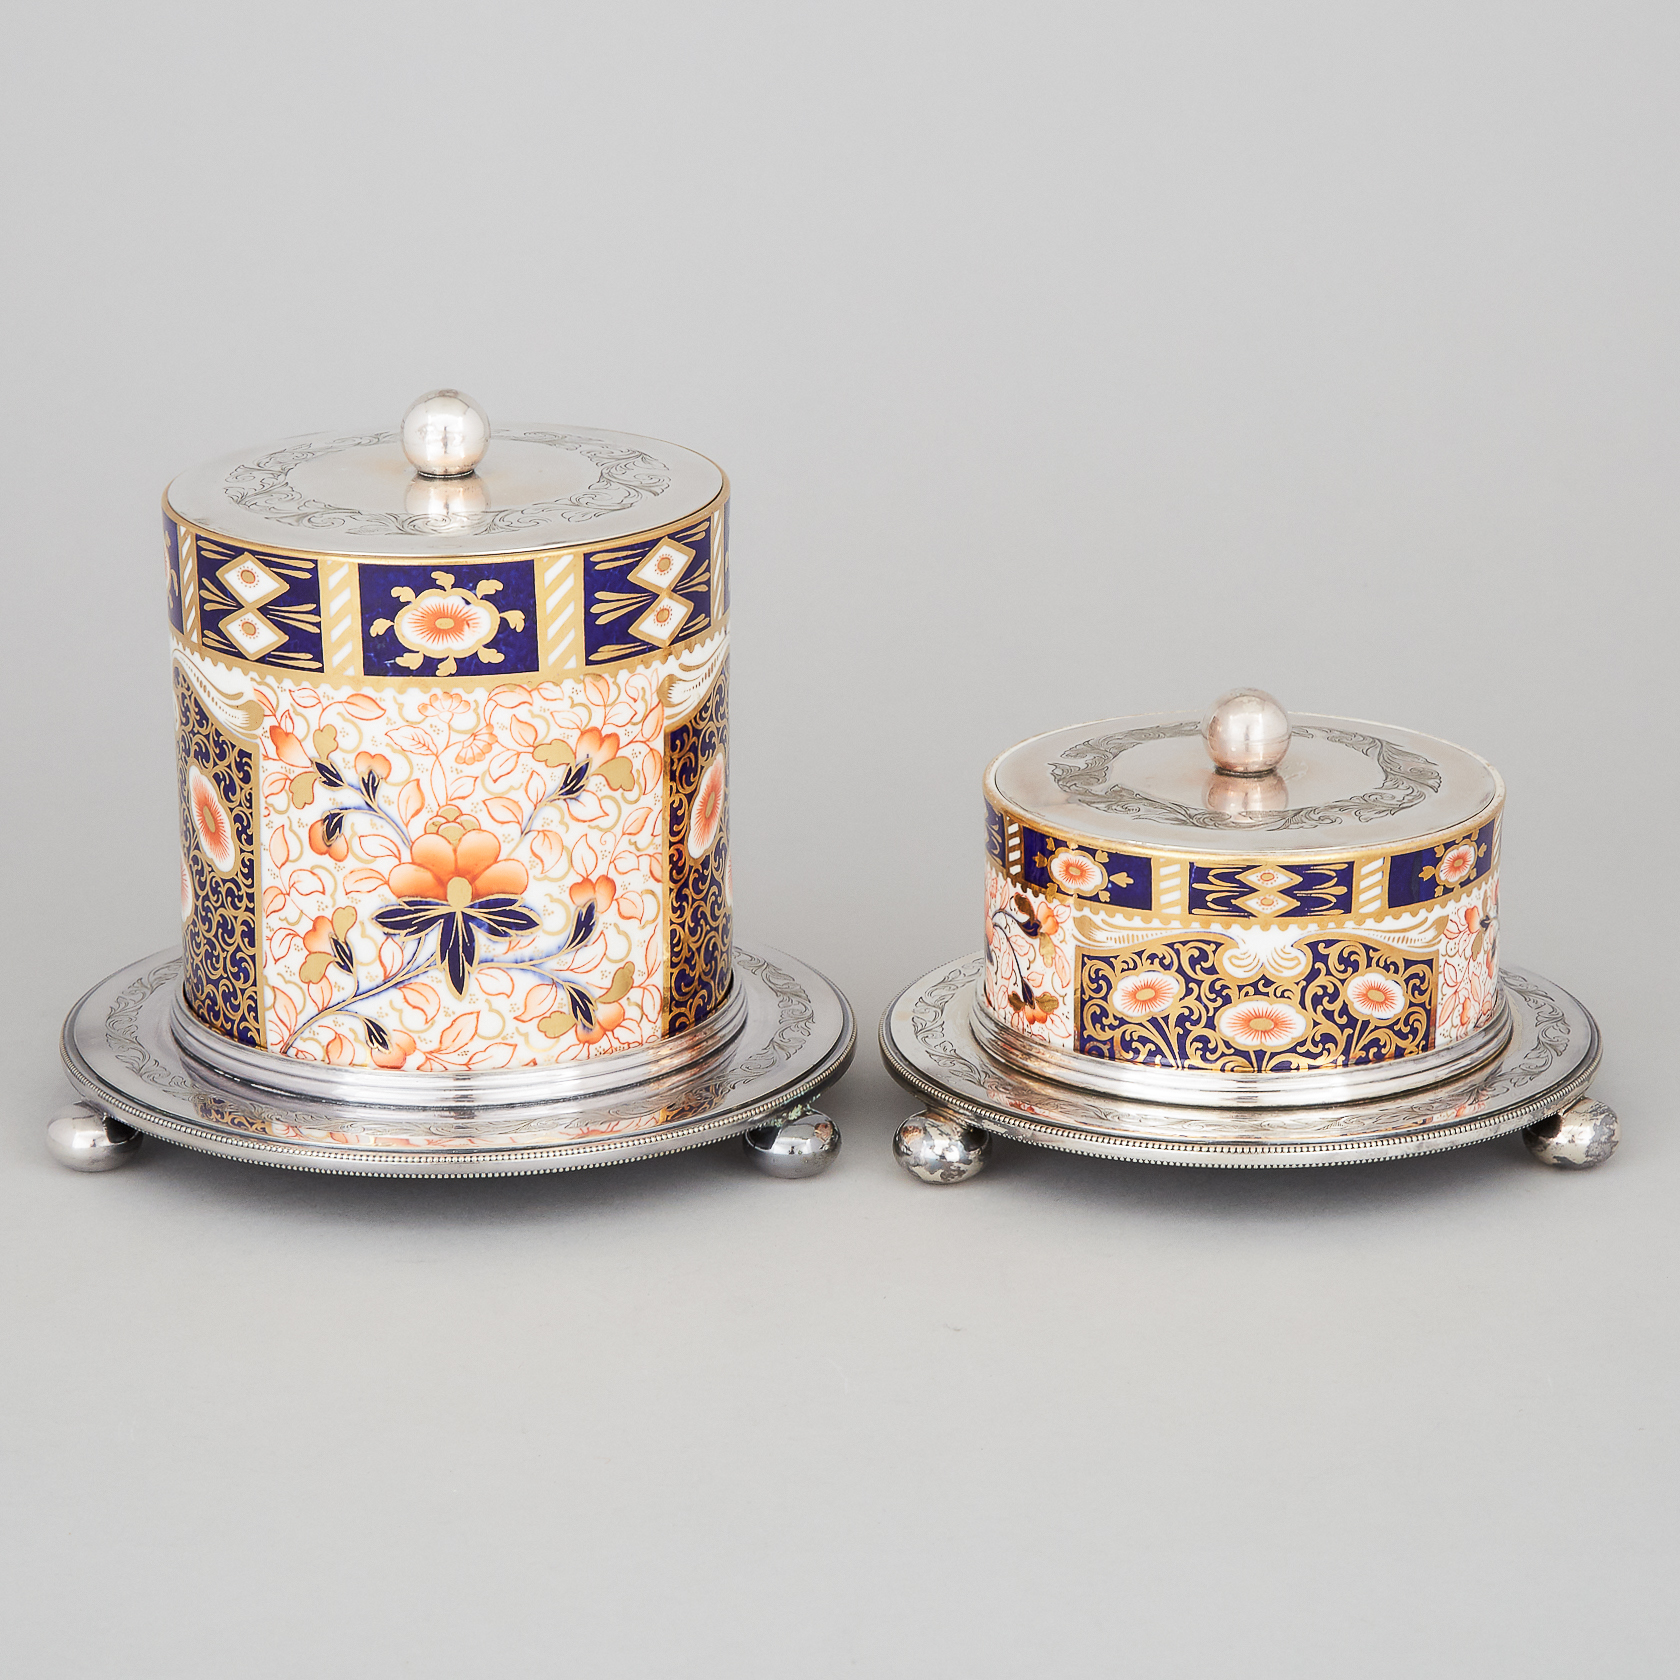 Brownfield Japan Pattern Biscuit Jar and Cheese Dish, late 19th century